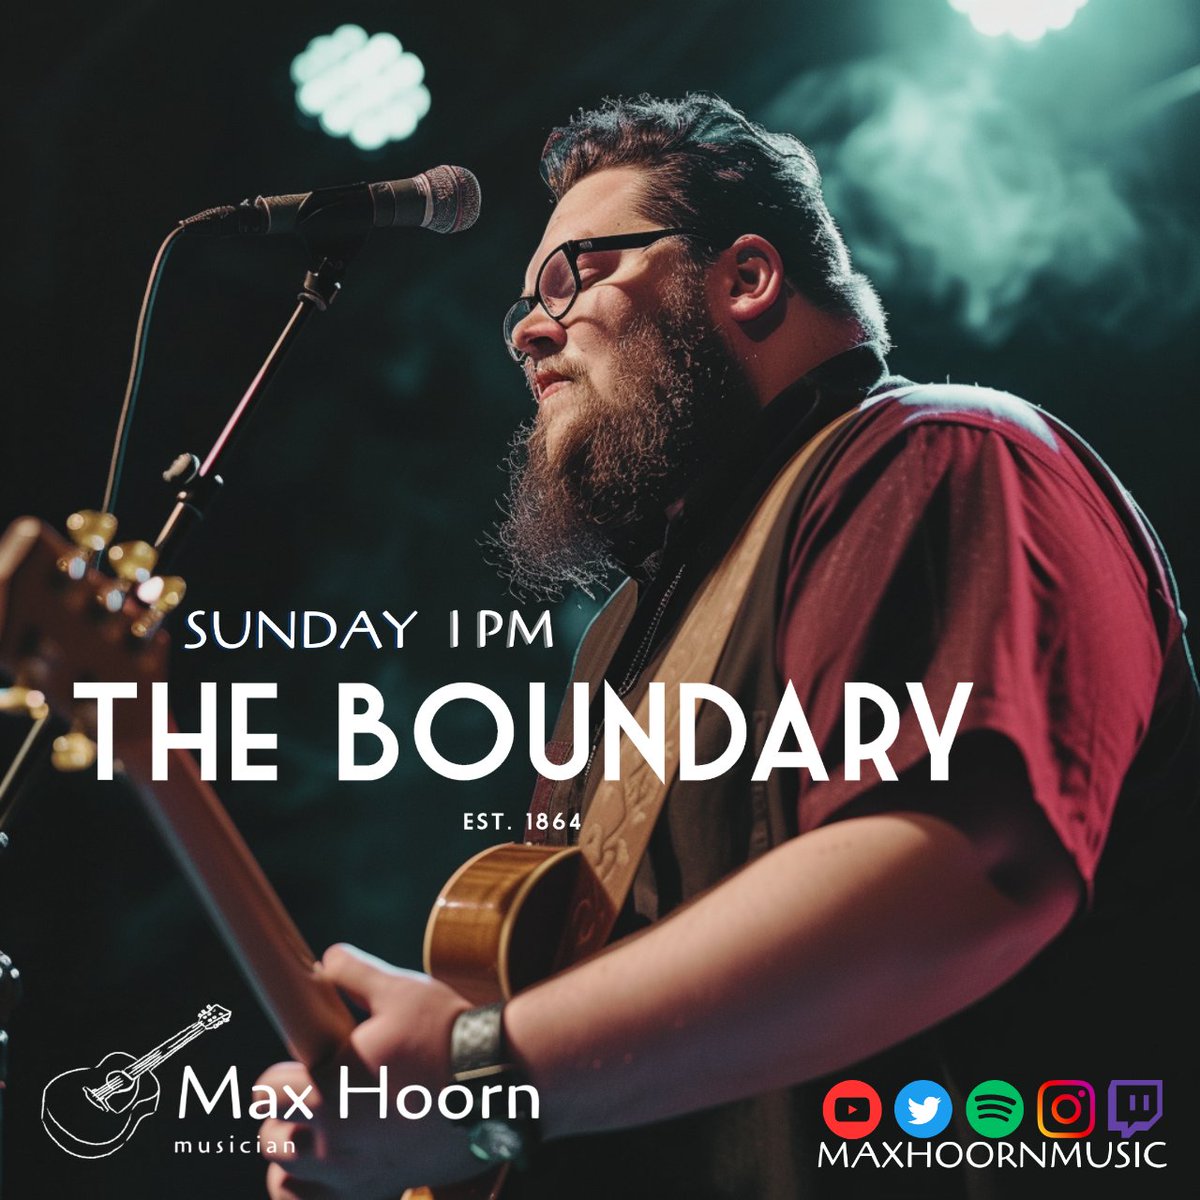 Playing this afternoon in West End at the Boundary Hotel in their Backyard from 1pm. Perfect place for a cheeky Sunday Sesh! #music #livemusic #loopy #matonguitars #qscaudio #qscaudio #maxhoorn #sennheiser #westend #singersongwriter #instagram #vorndao #supportlivemusic